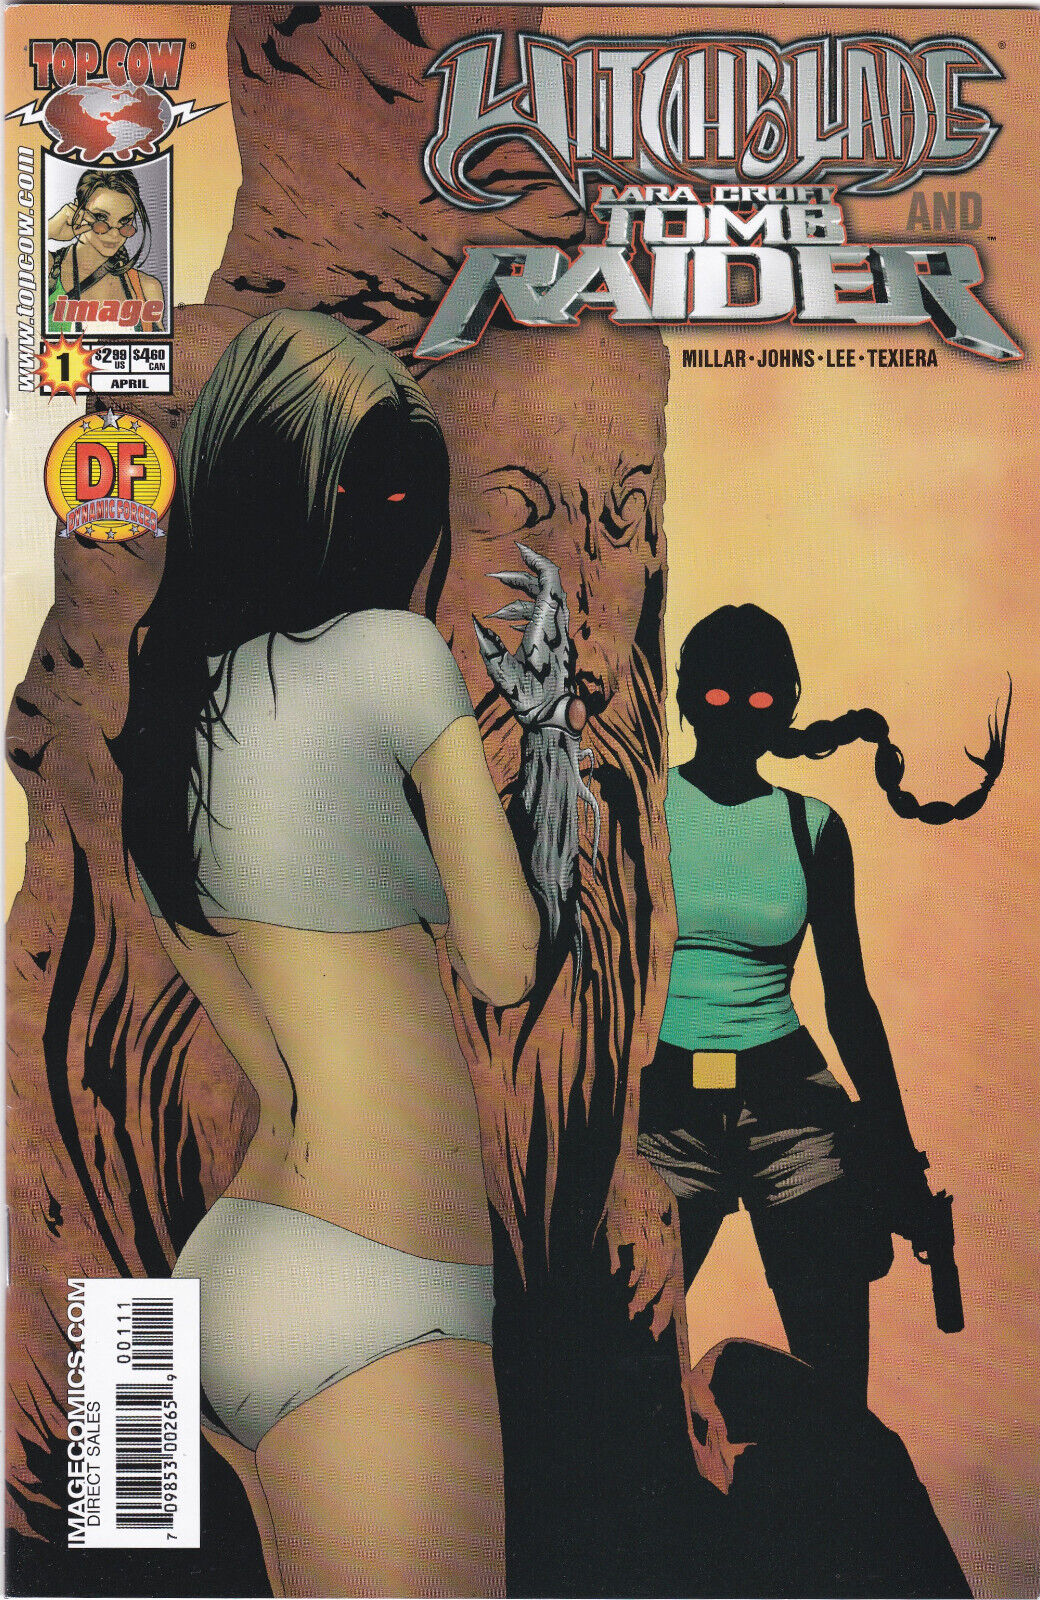 Witchblade Tomb Raider #1 DF Dynamic Forces Variant Cover Comic Book High Grade